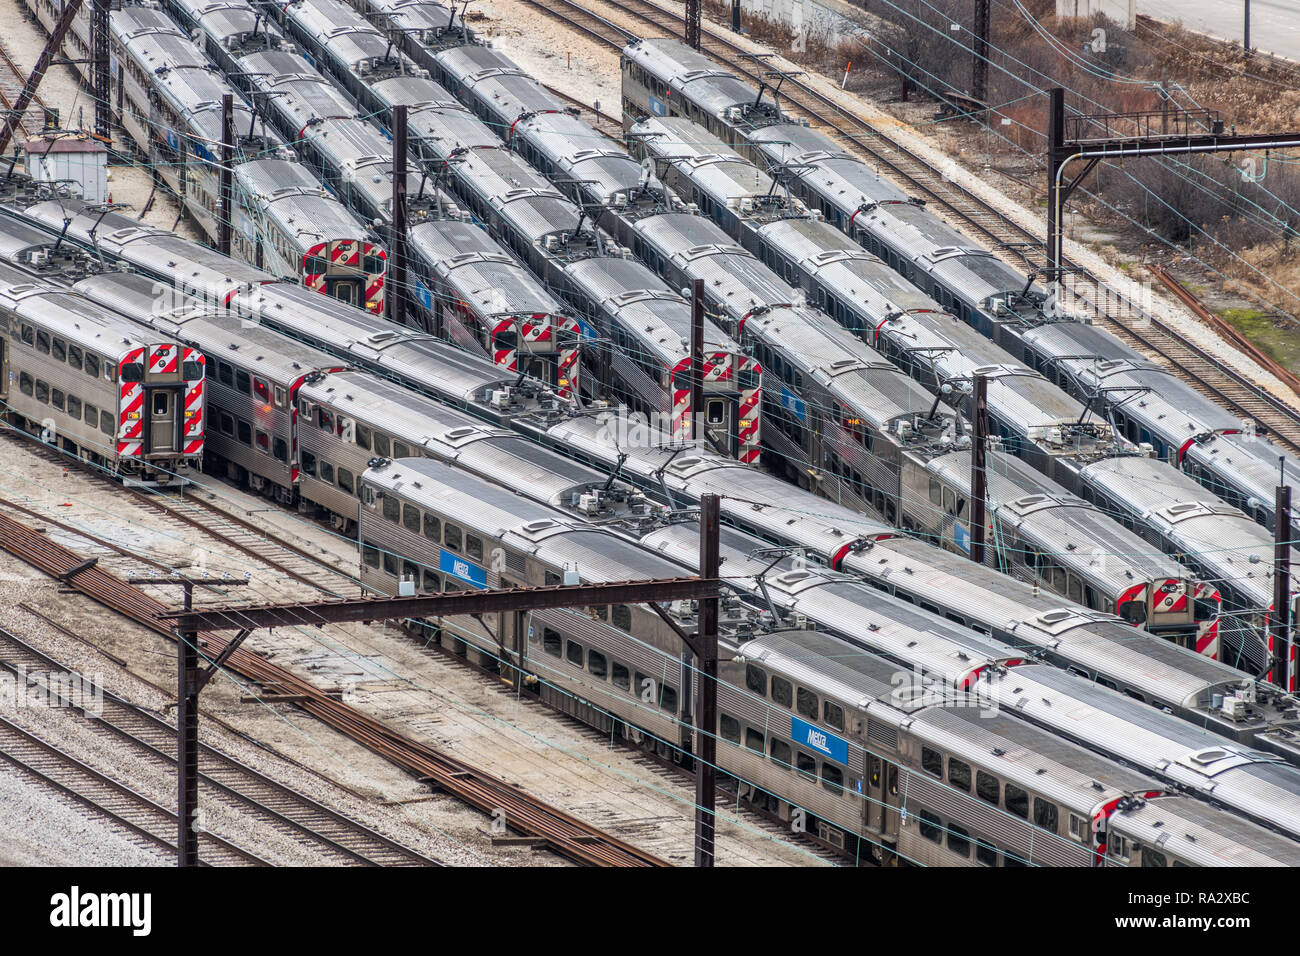 Aerial view of Metra Trains in railyard Stock Photo